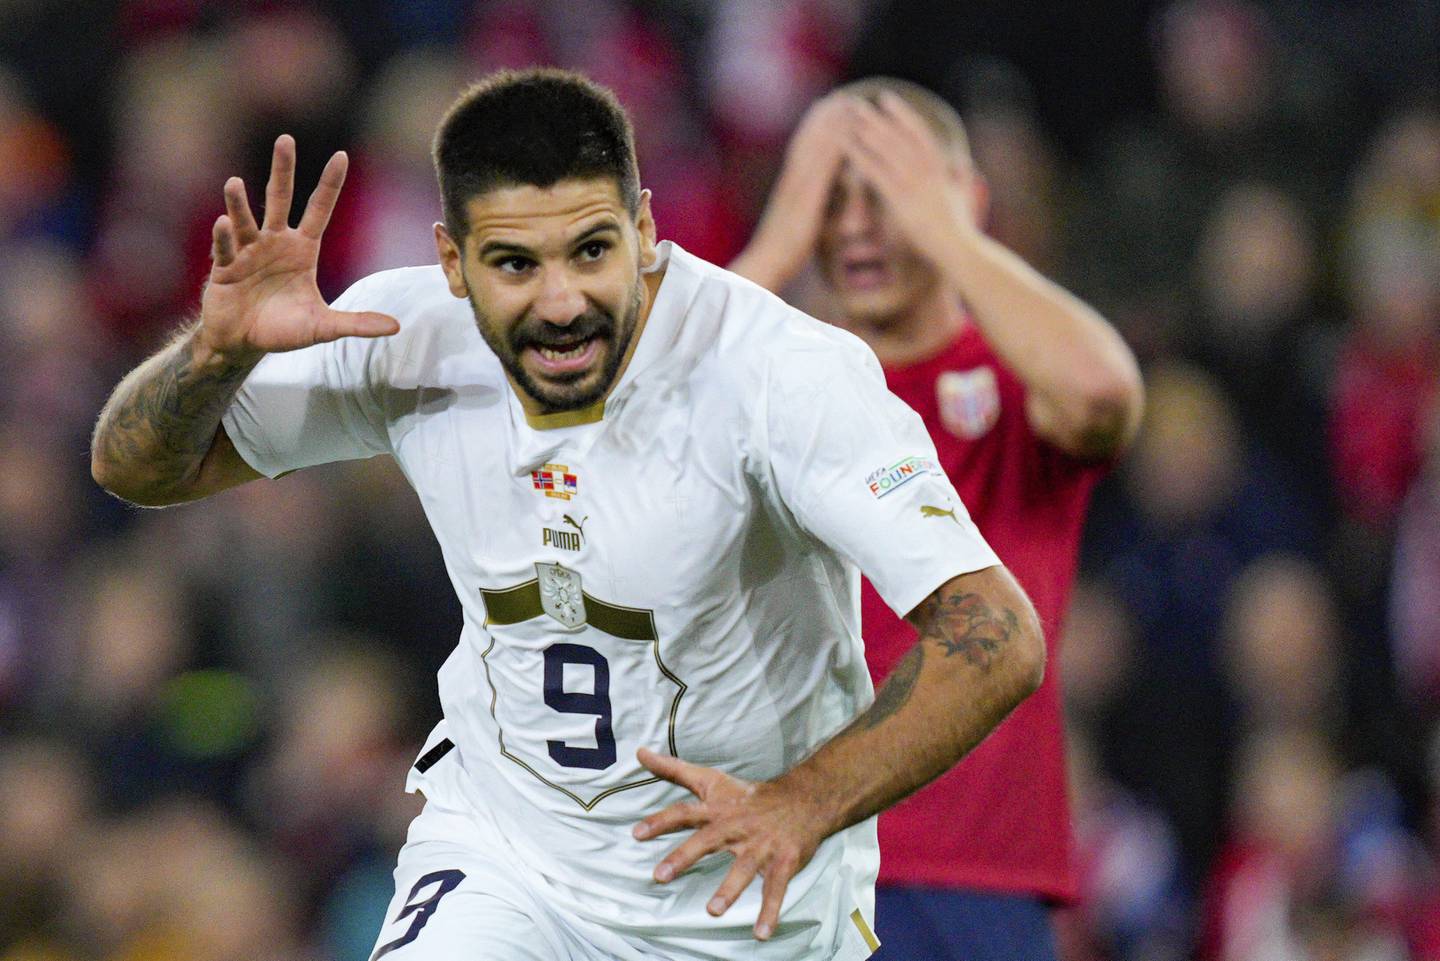 All-time top scorer Aleksandar Mitrovic will lead the line for Serbia at the 2022 World Cup. AP